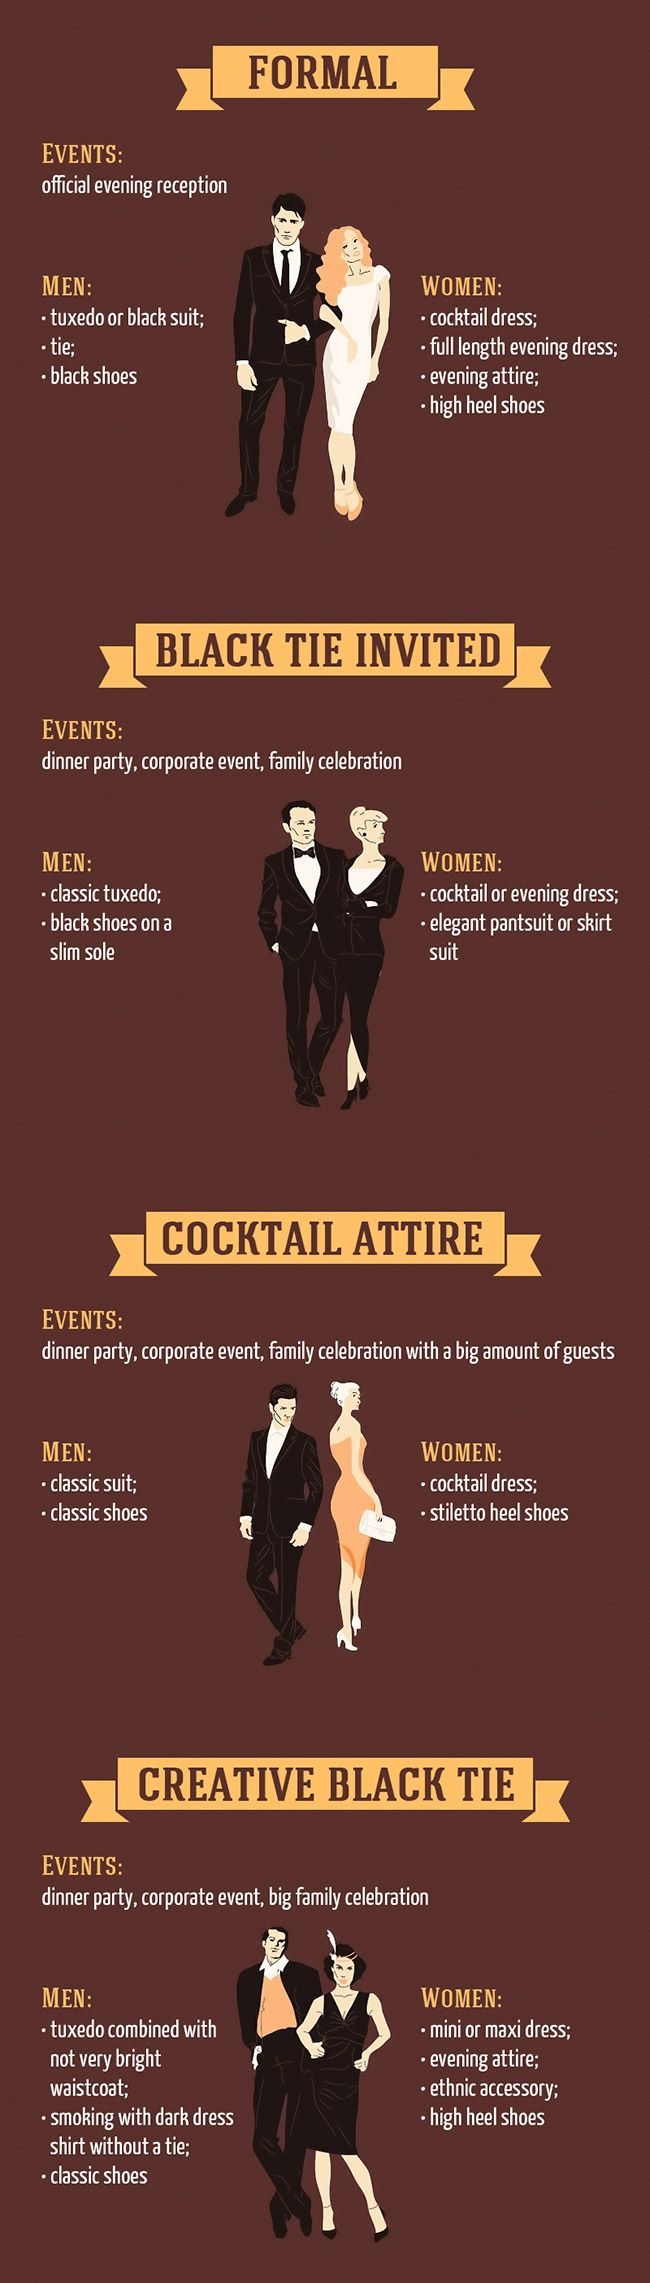 The best guide to basic dress code rules you’ve ever seen